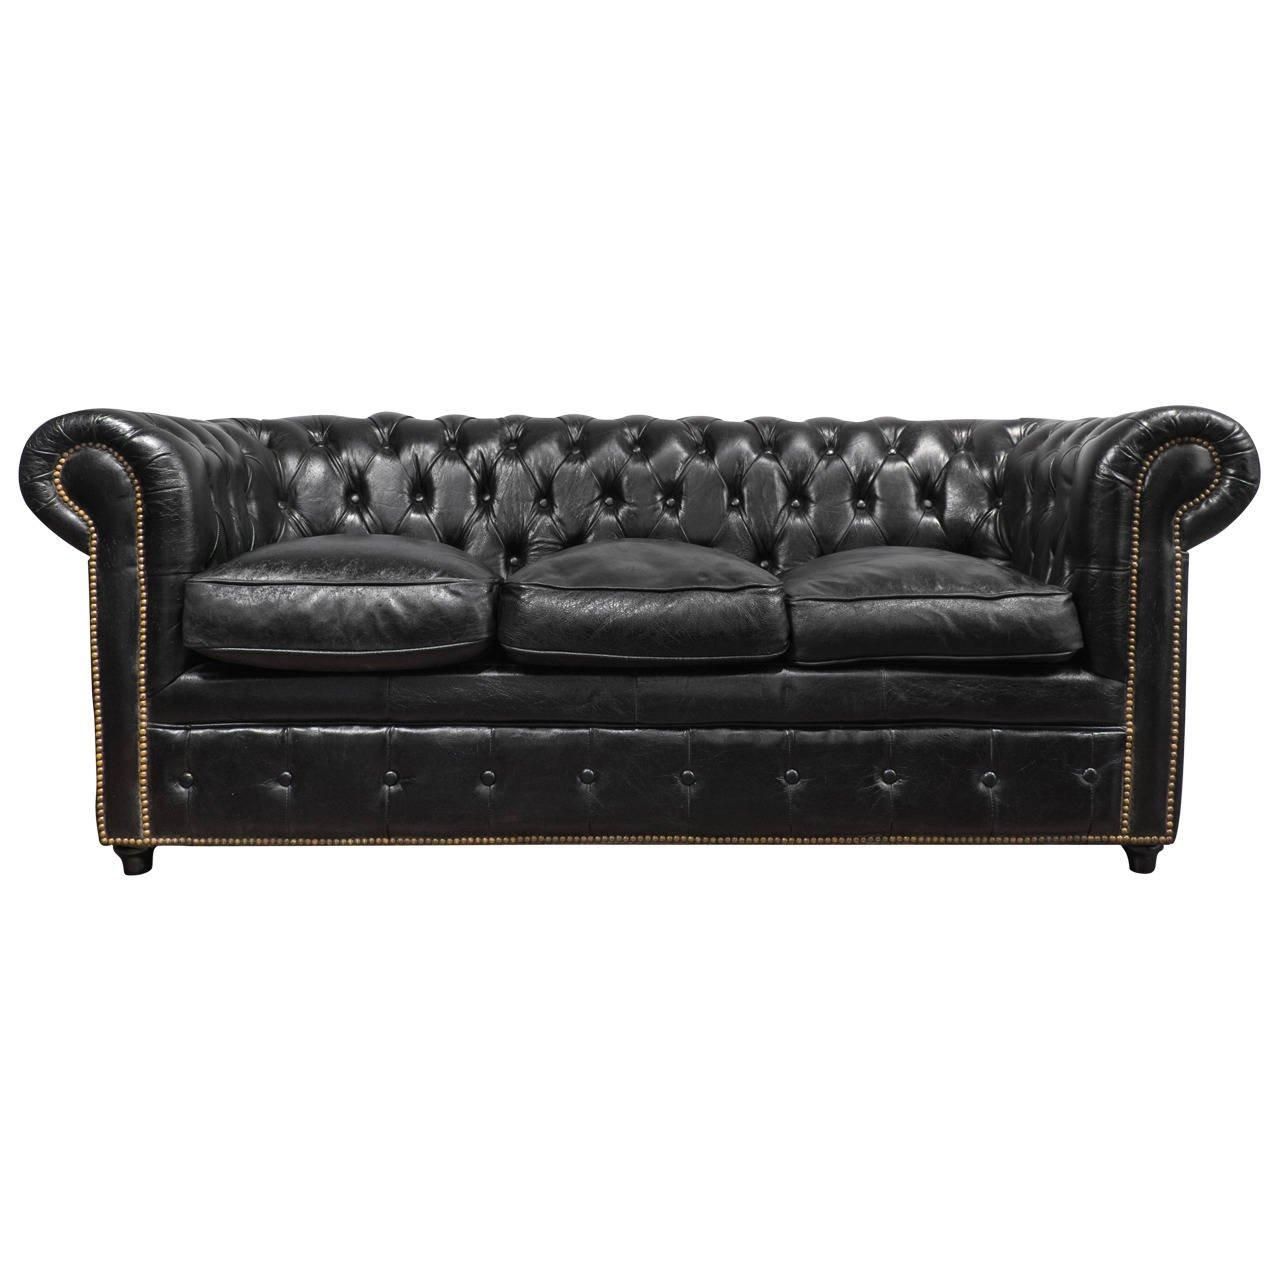 Vintage Black Leather Chesterfield Sofa At 1stdibs With Vintage Chesterfield Sofas (View 11 of 20)